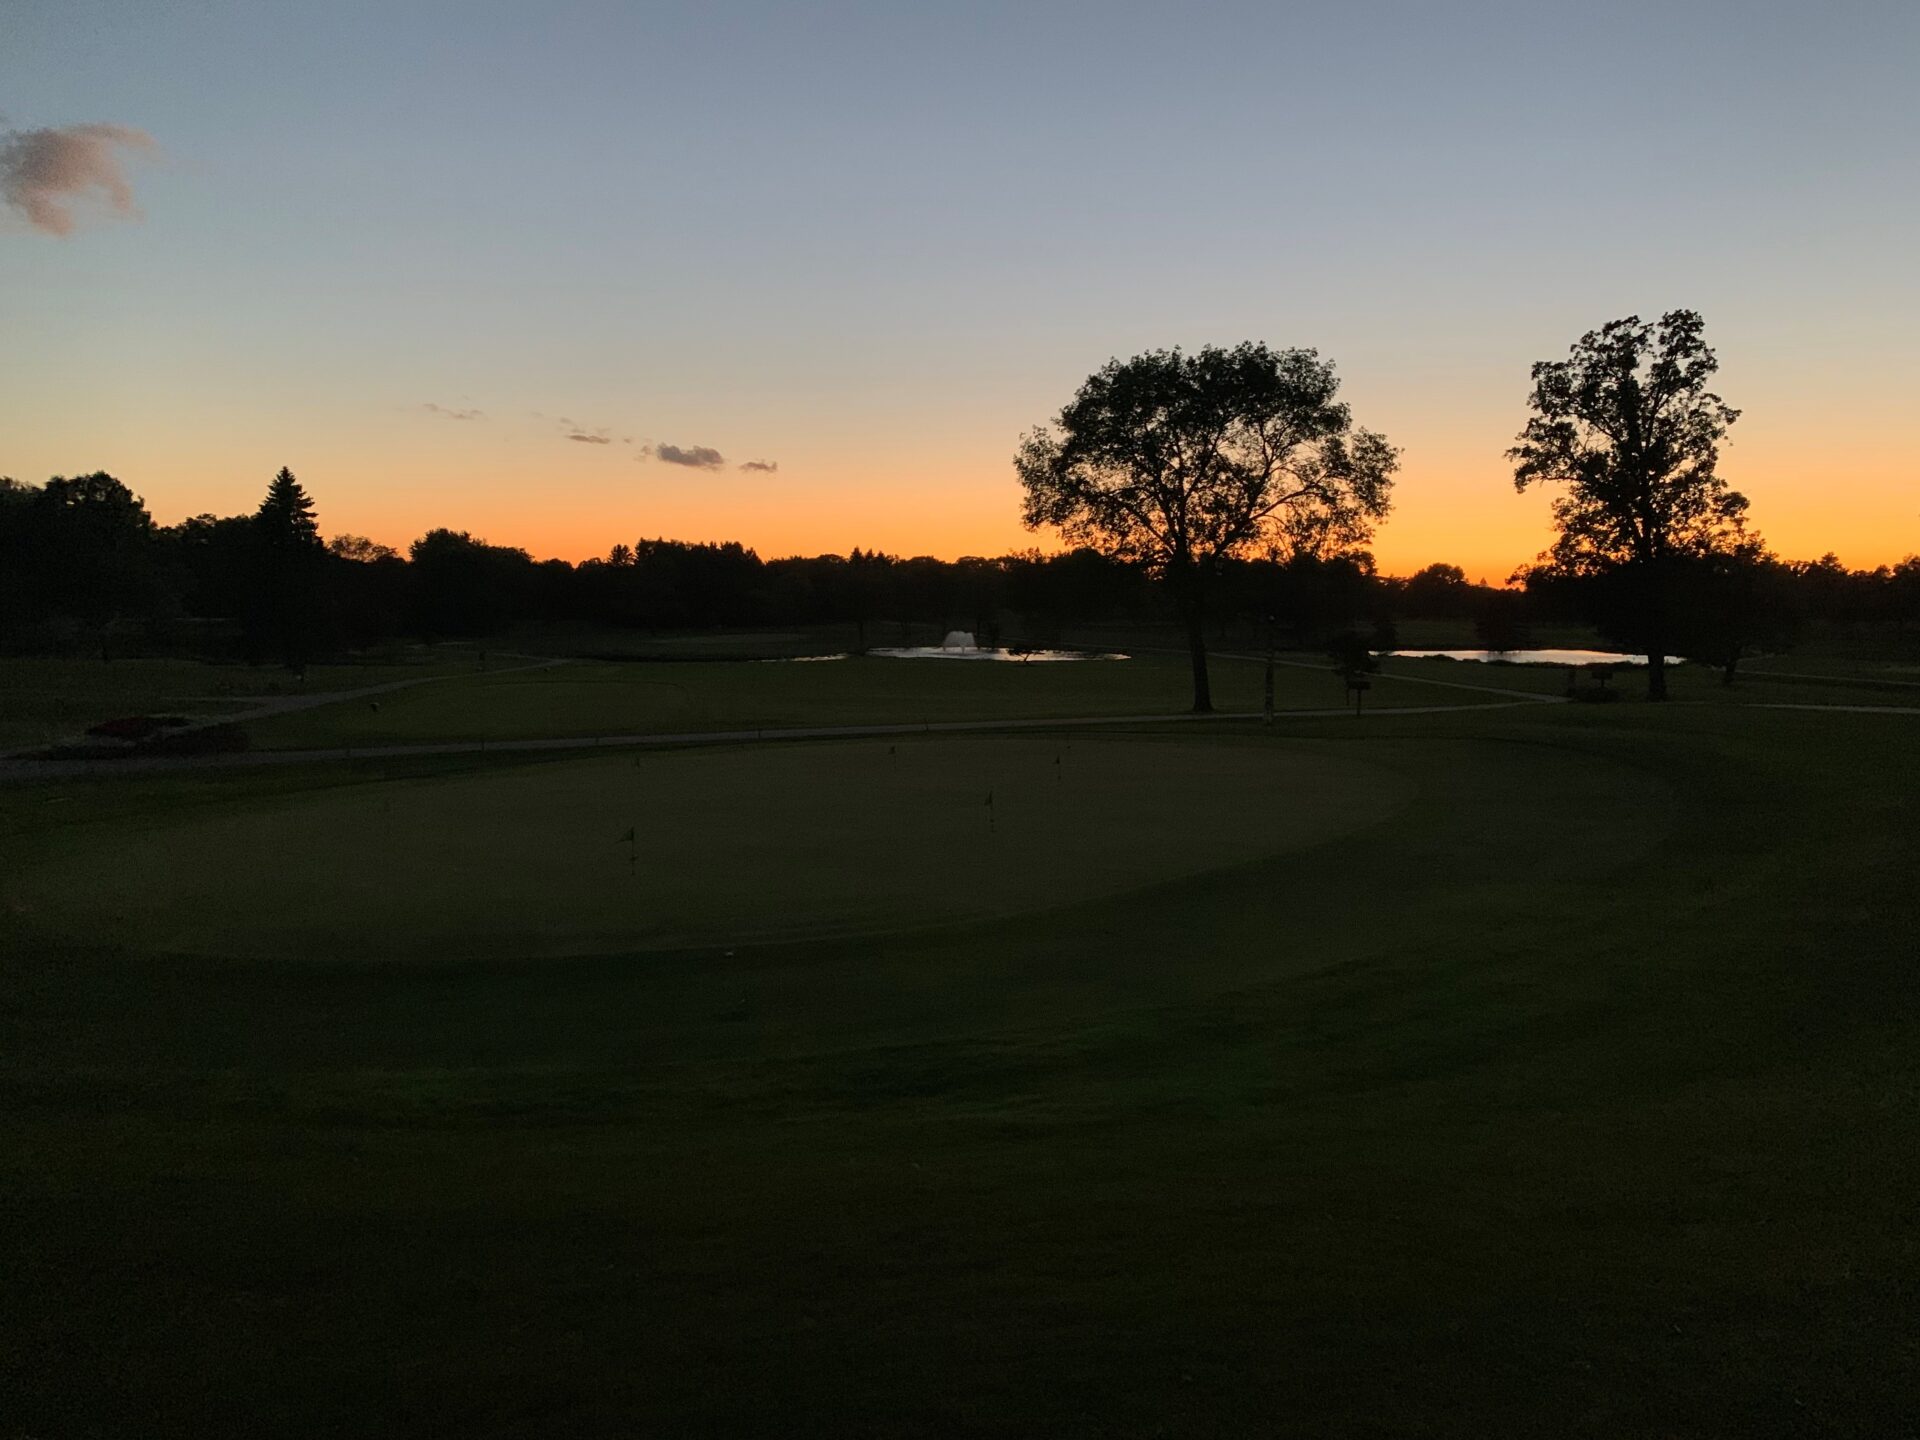 Little Crow Golf Course view at sunset